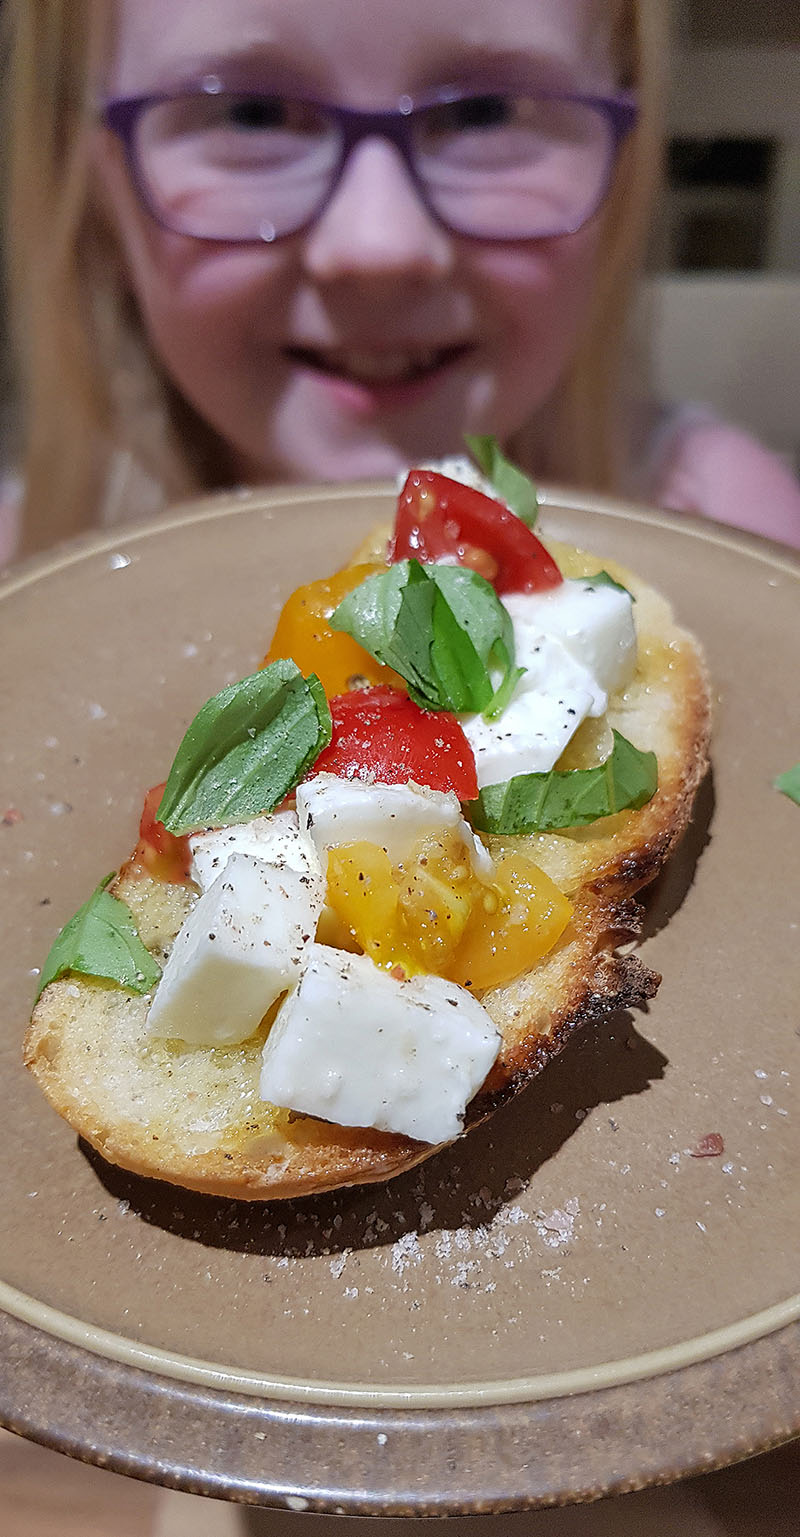 Give us this day our daily… bruschetta